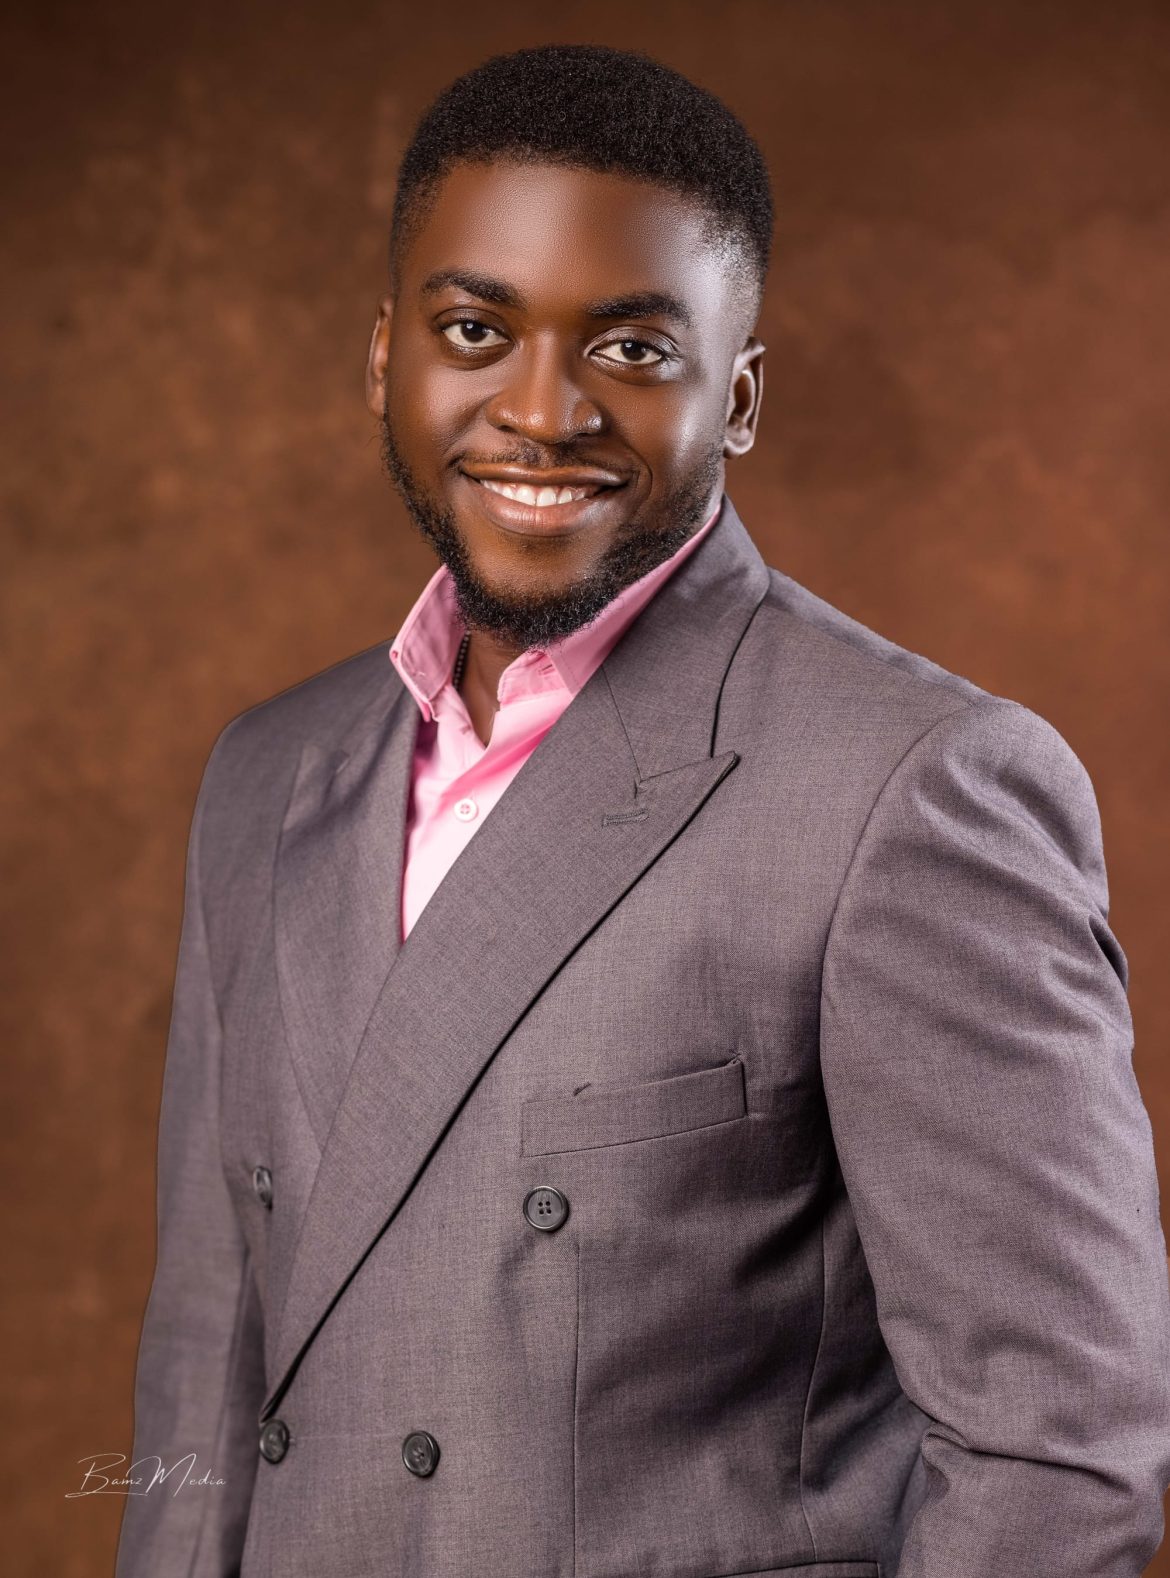 Amenawon Esezobor’s remarkable journey to becoming a world-class software engineer